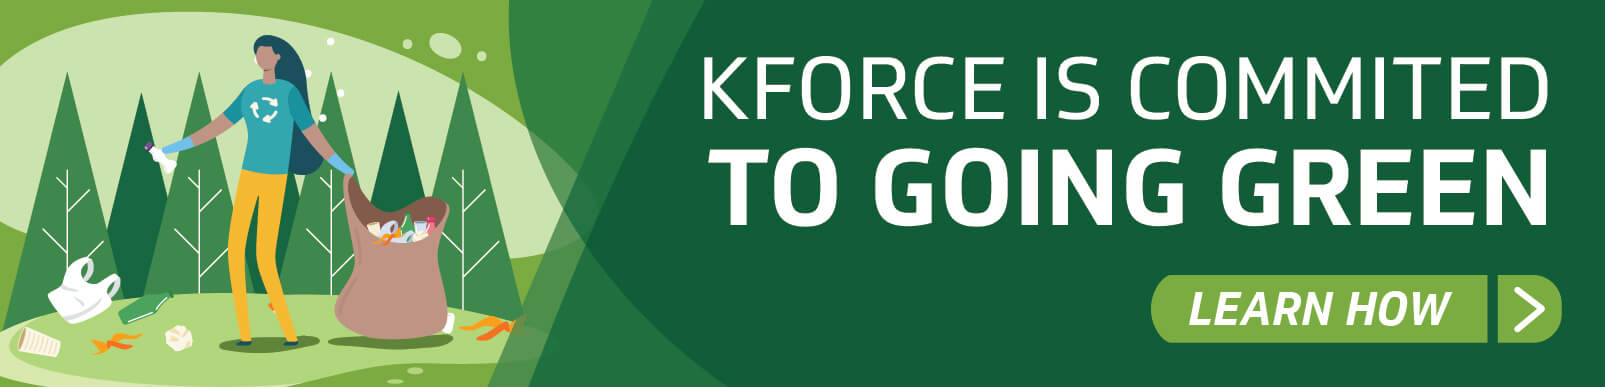 Kforce is Committed to Going Green